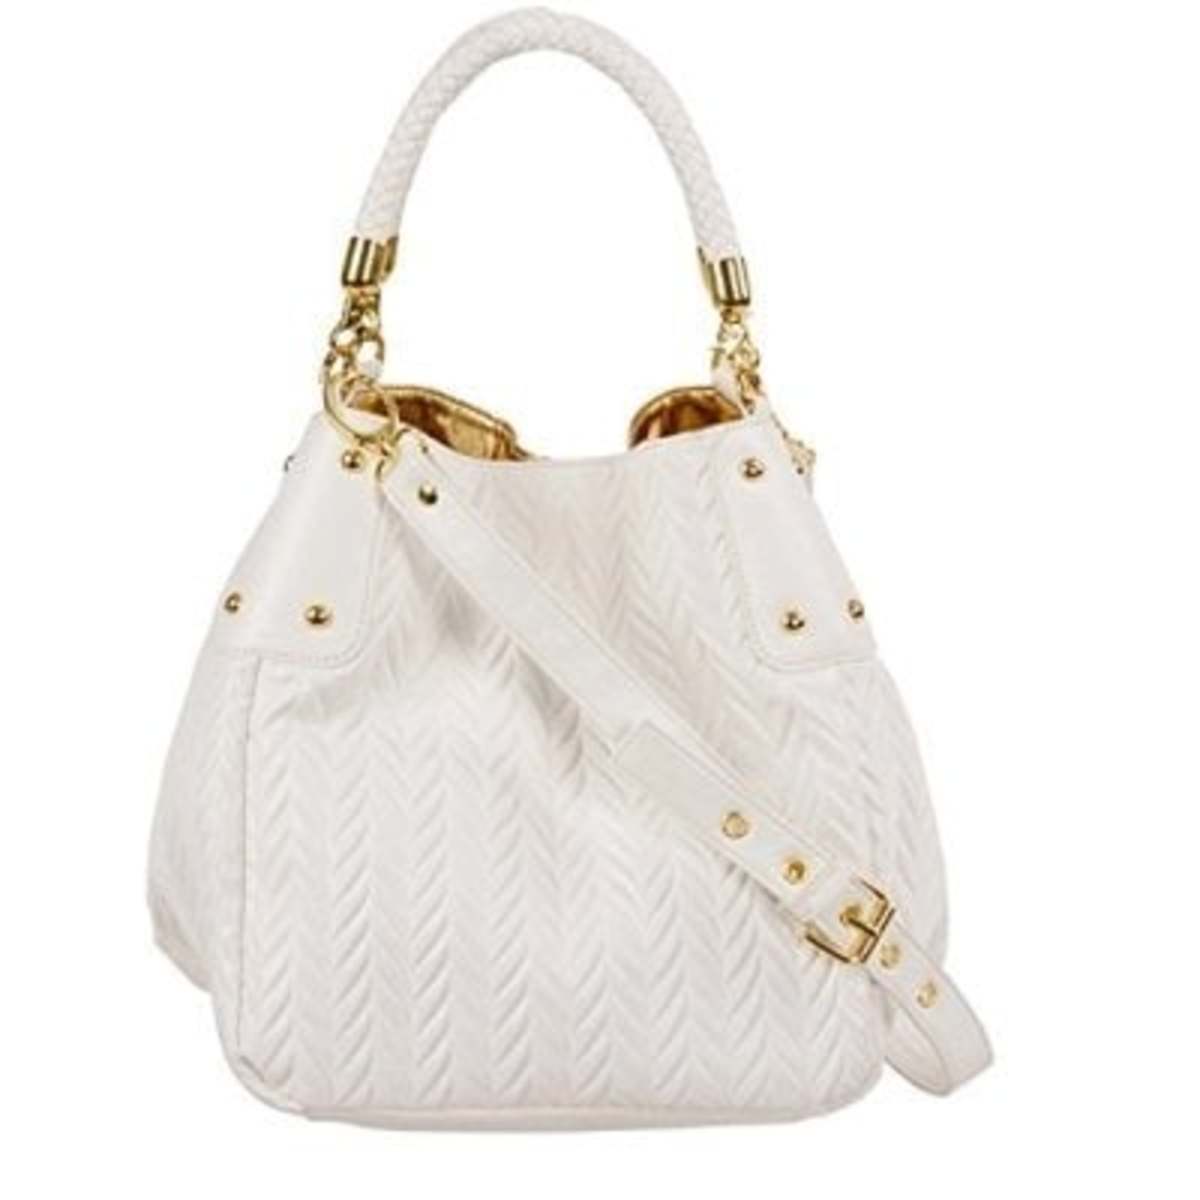 15 Most Adorable and Ergonomic Handbags for Women - HubPages